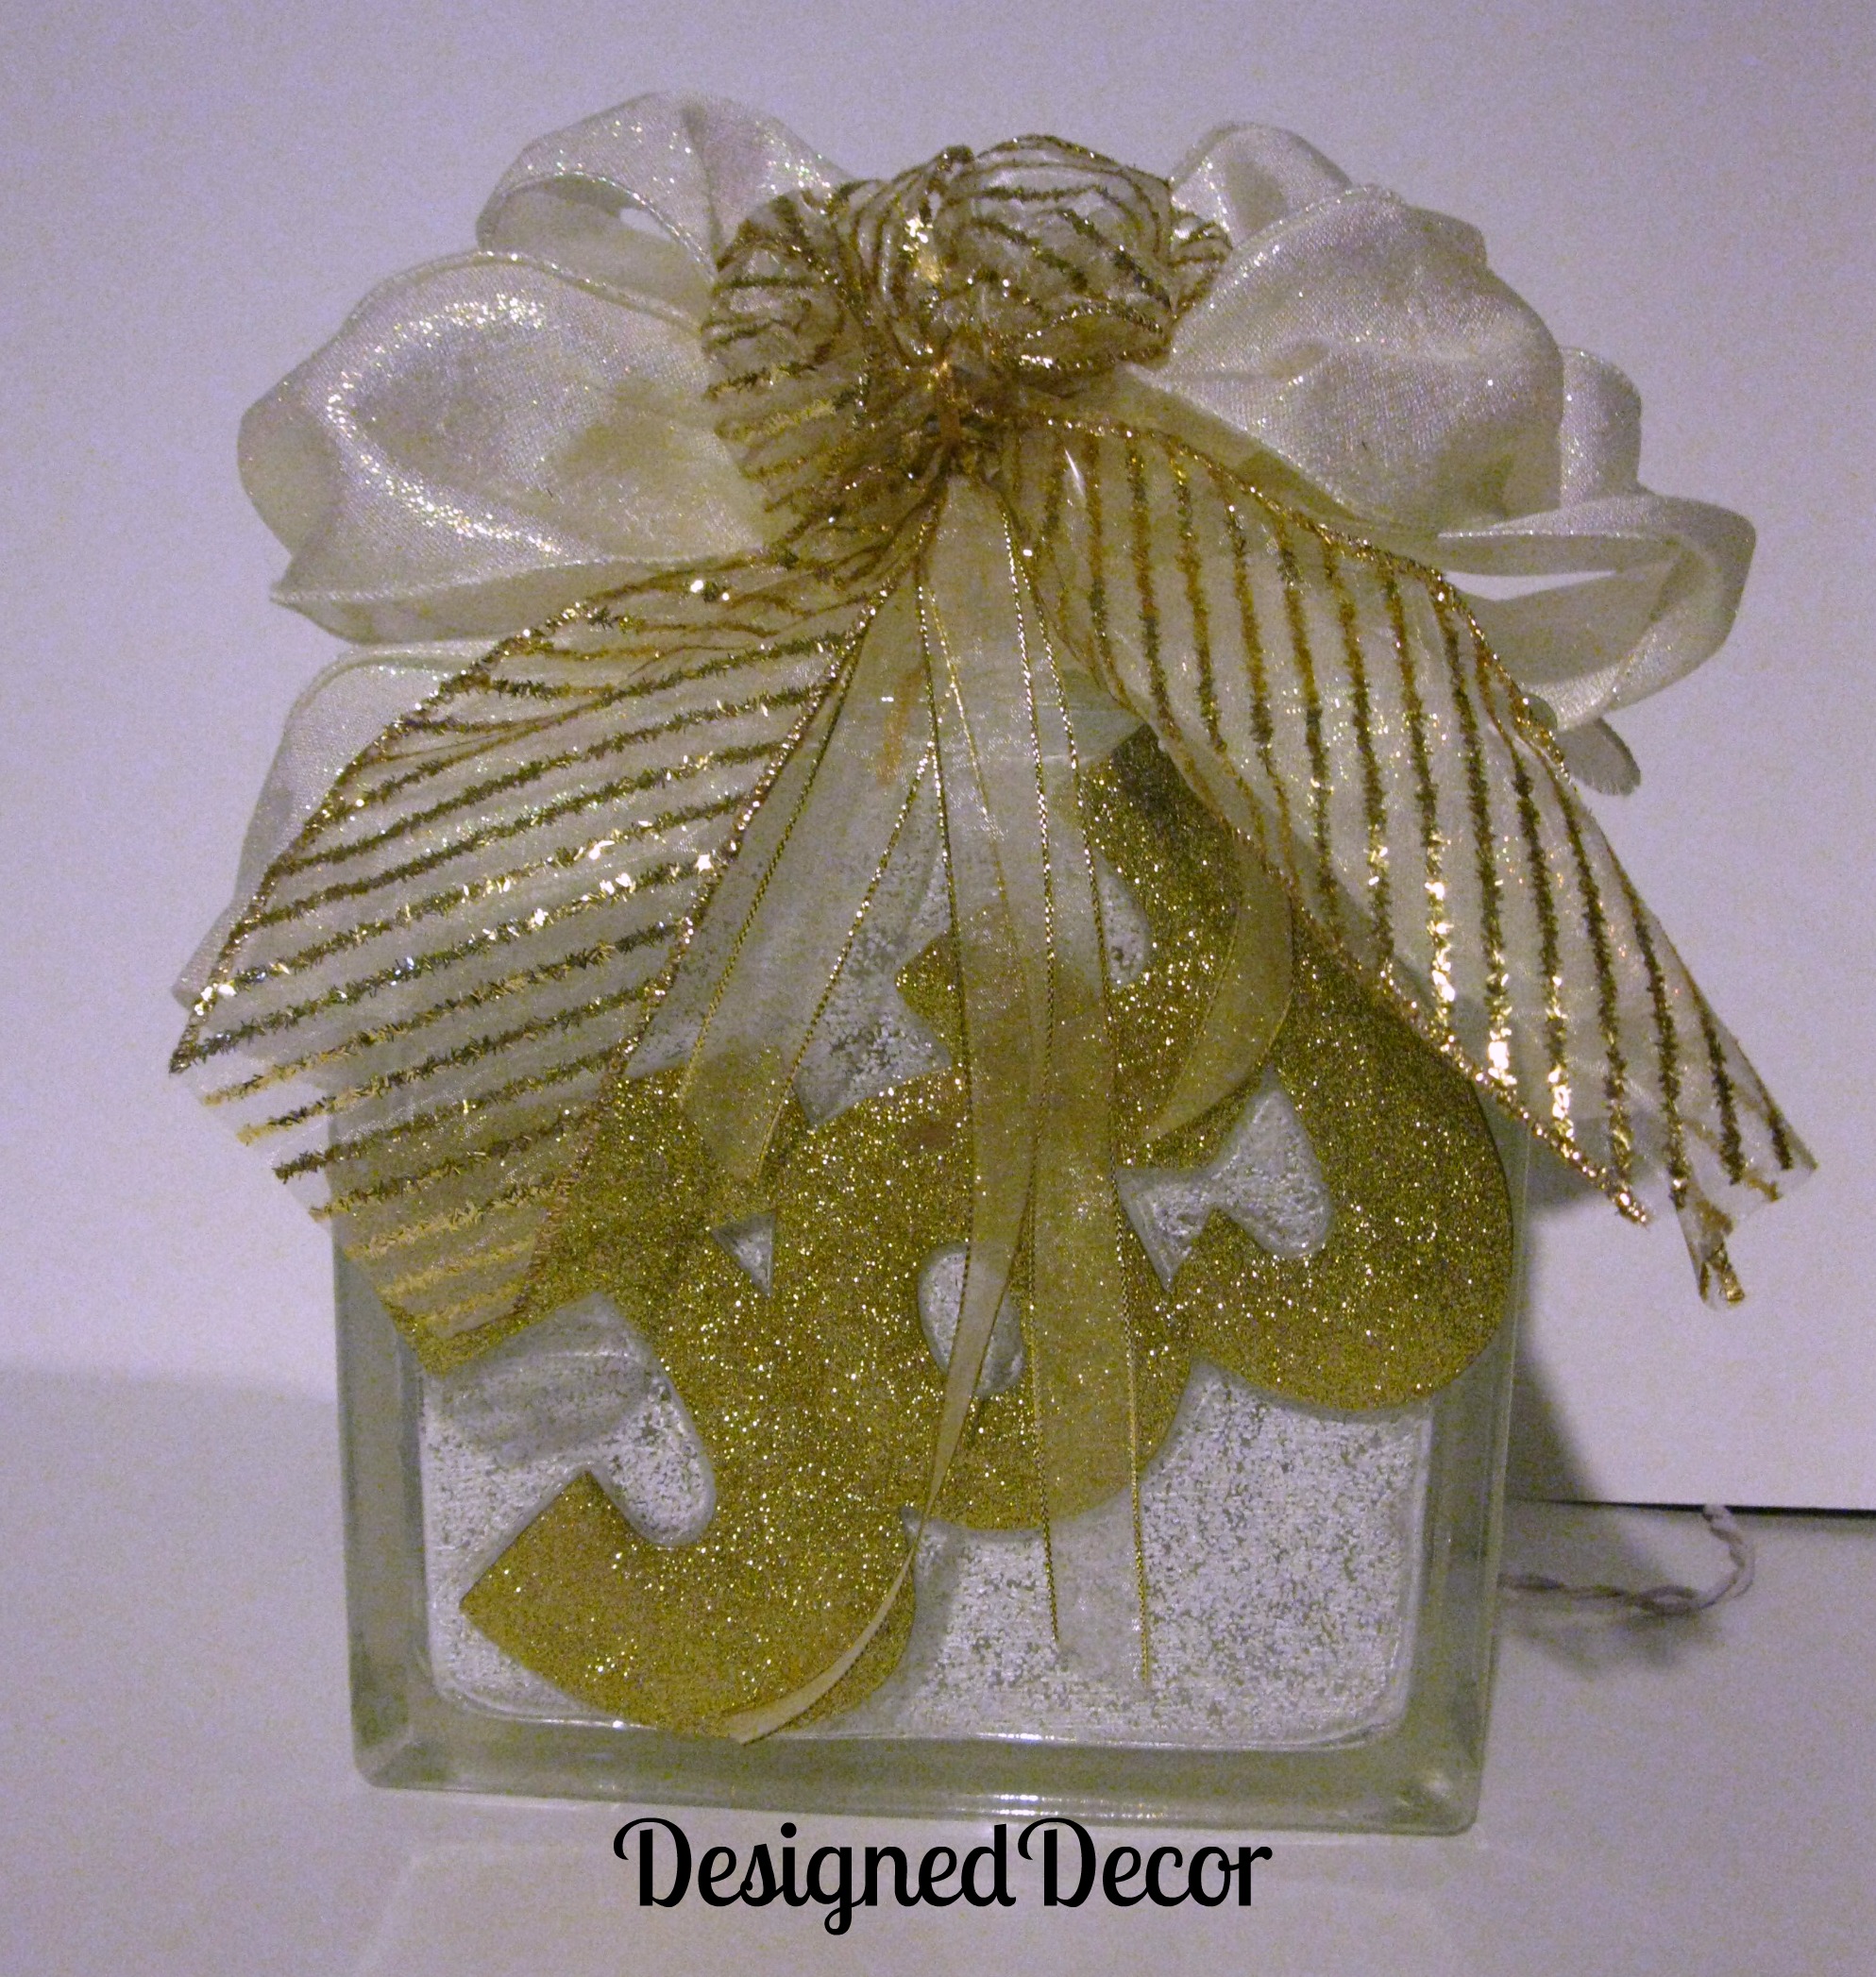 Learn how easy our glass blocks are to decorate and bring the